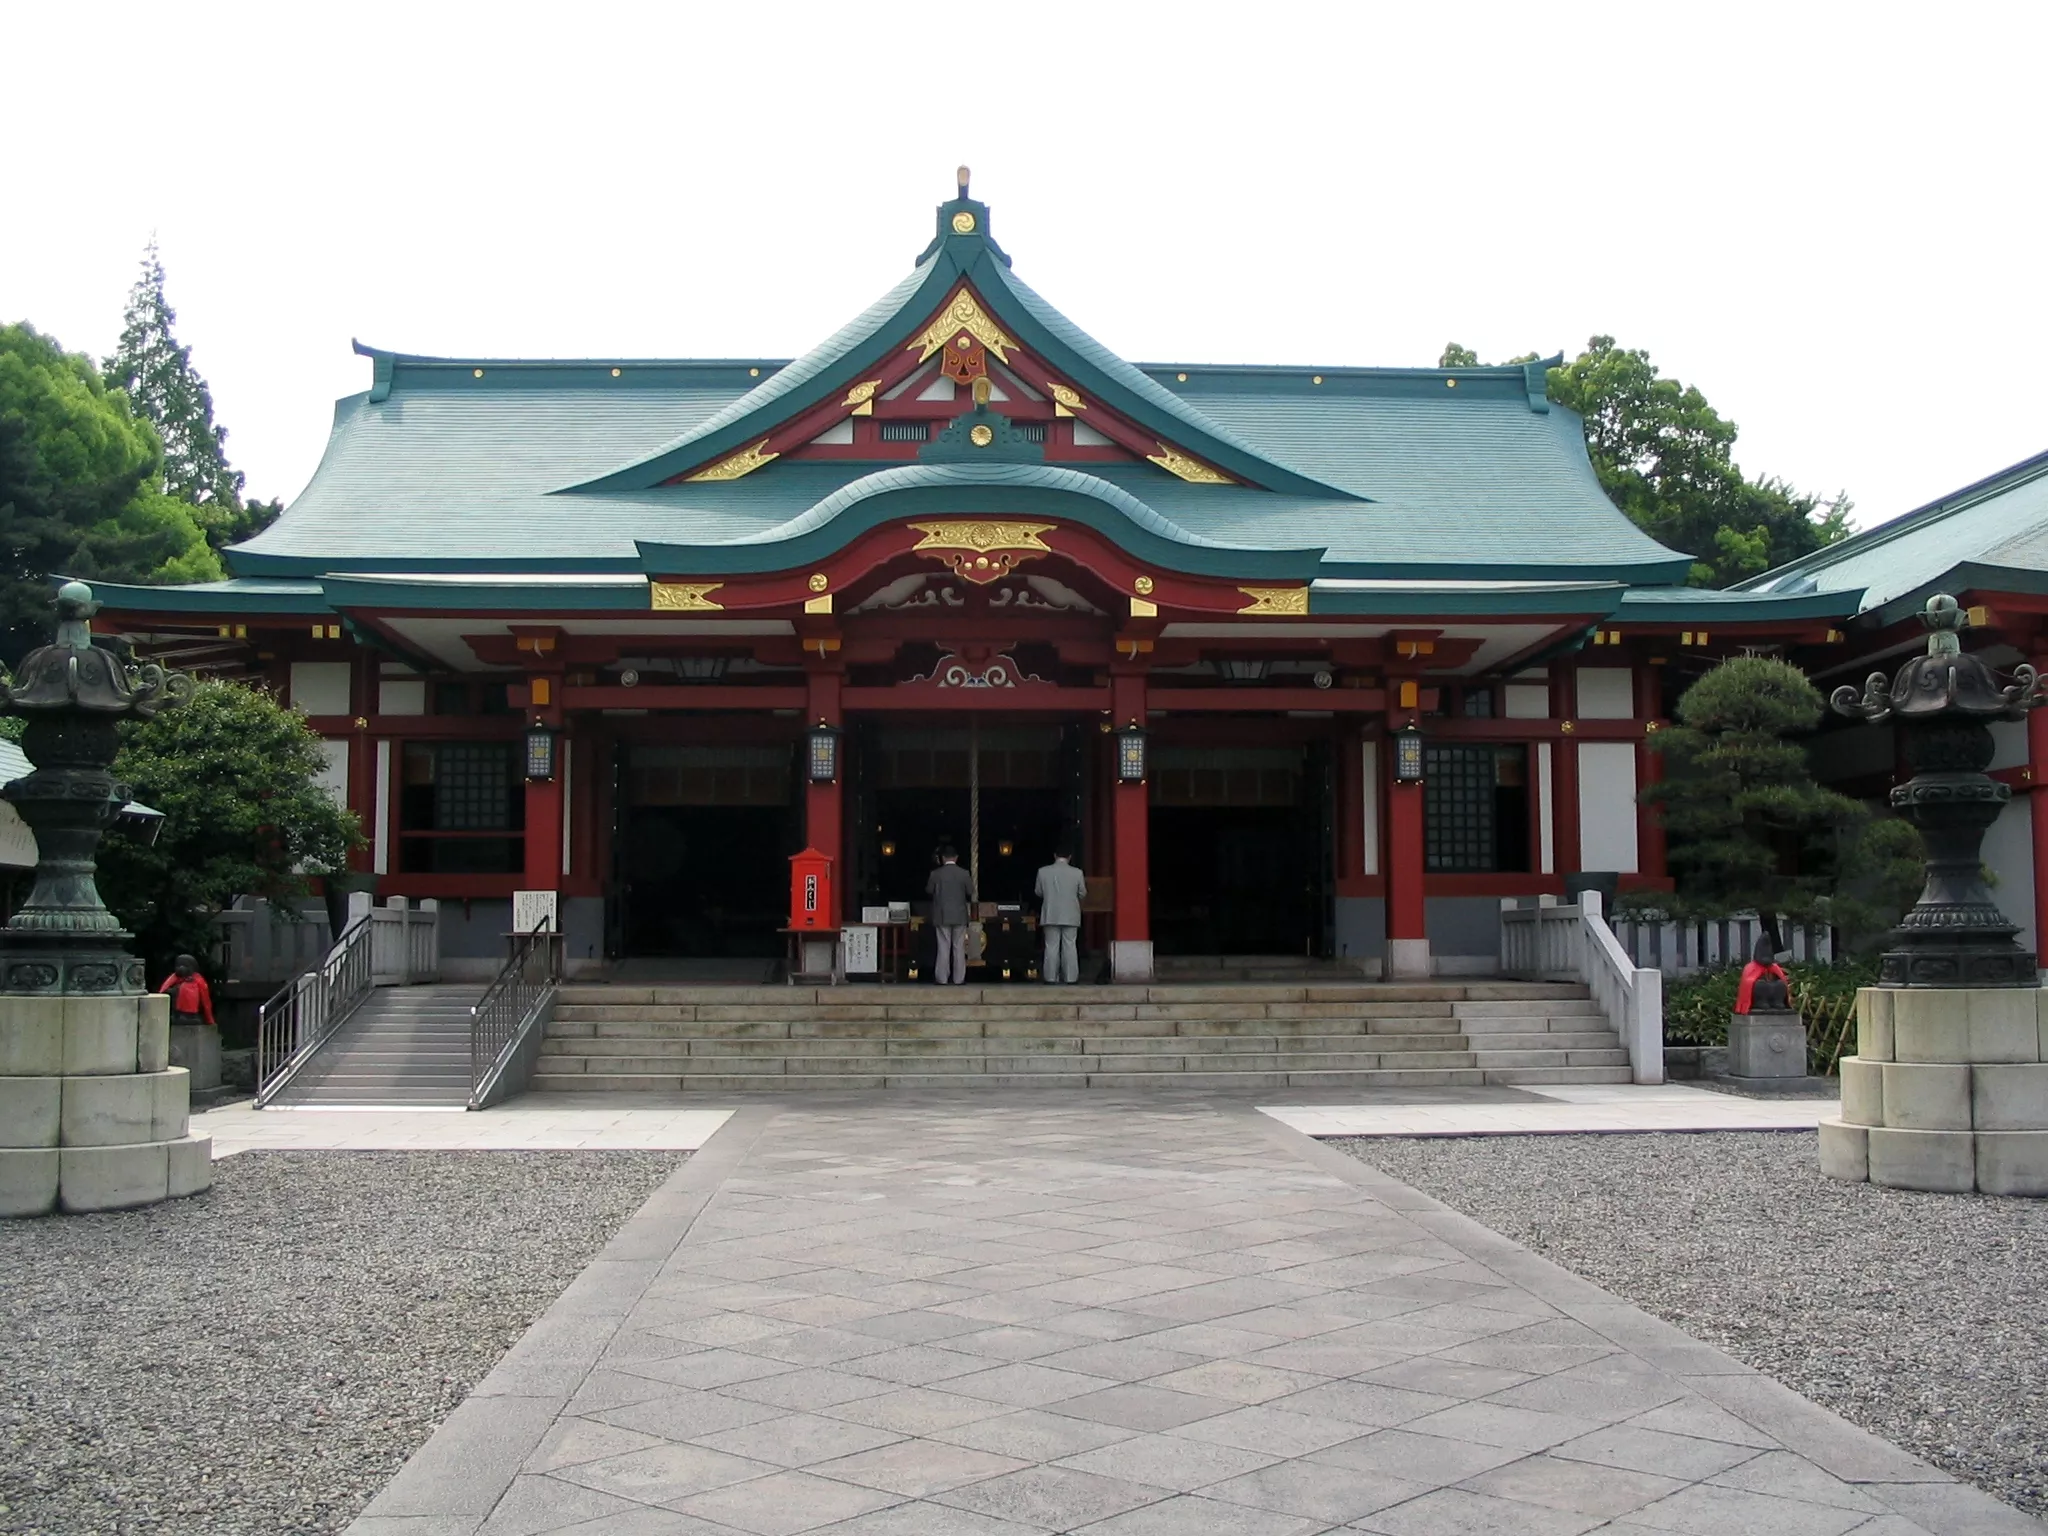 Hie-jinja in Japan, East Asia | Architecture - Rated 3.6